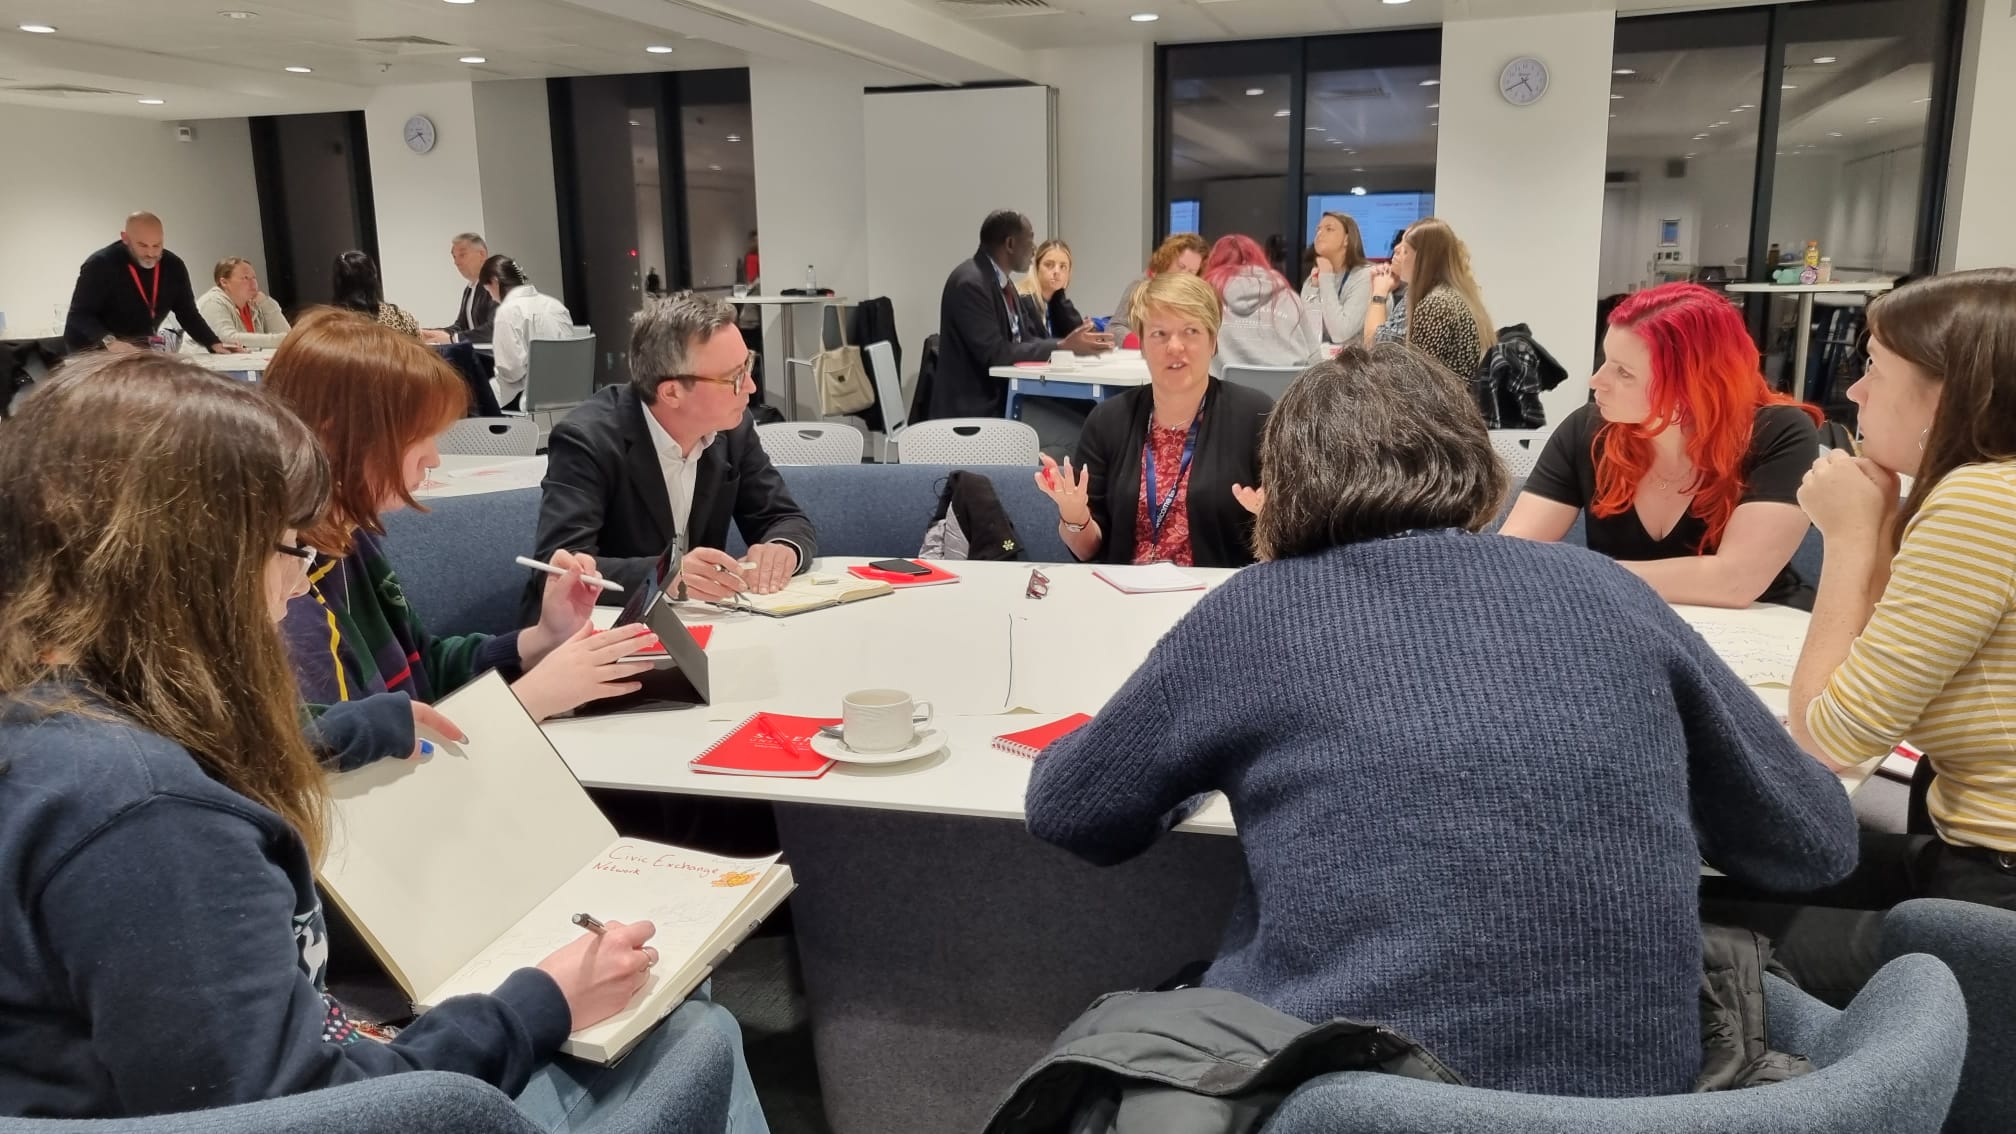 Attendees at the first Civic Exchange Network event at Solent University discussing various topics, including what the language of welcome is.